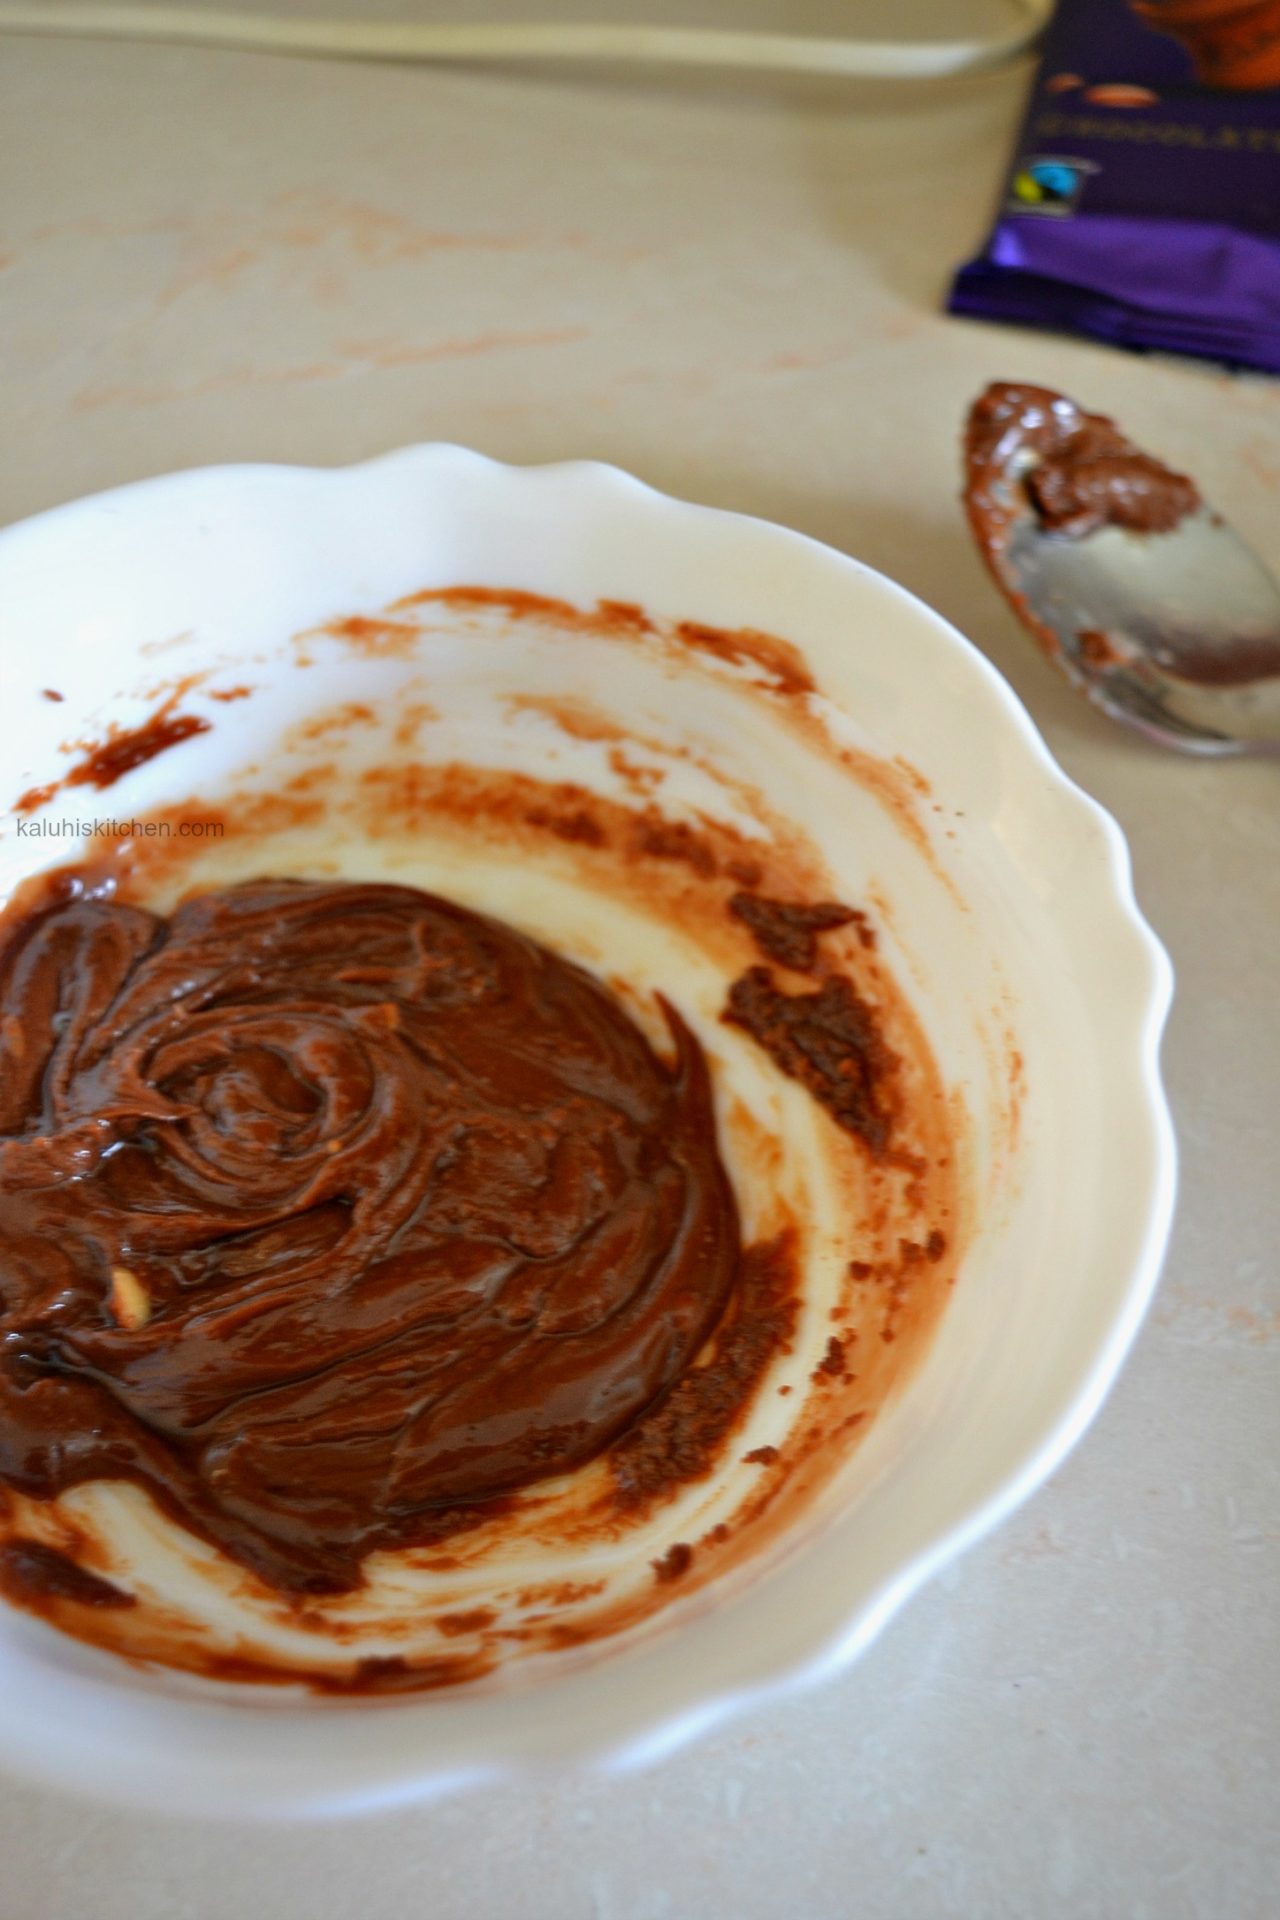 melt your chocolate in preparation for the chocolate mousse_kaluhiskitchen.com